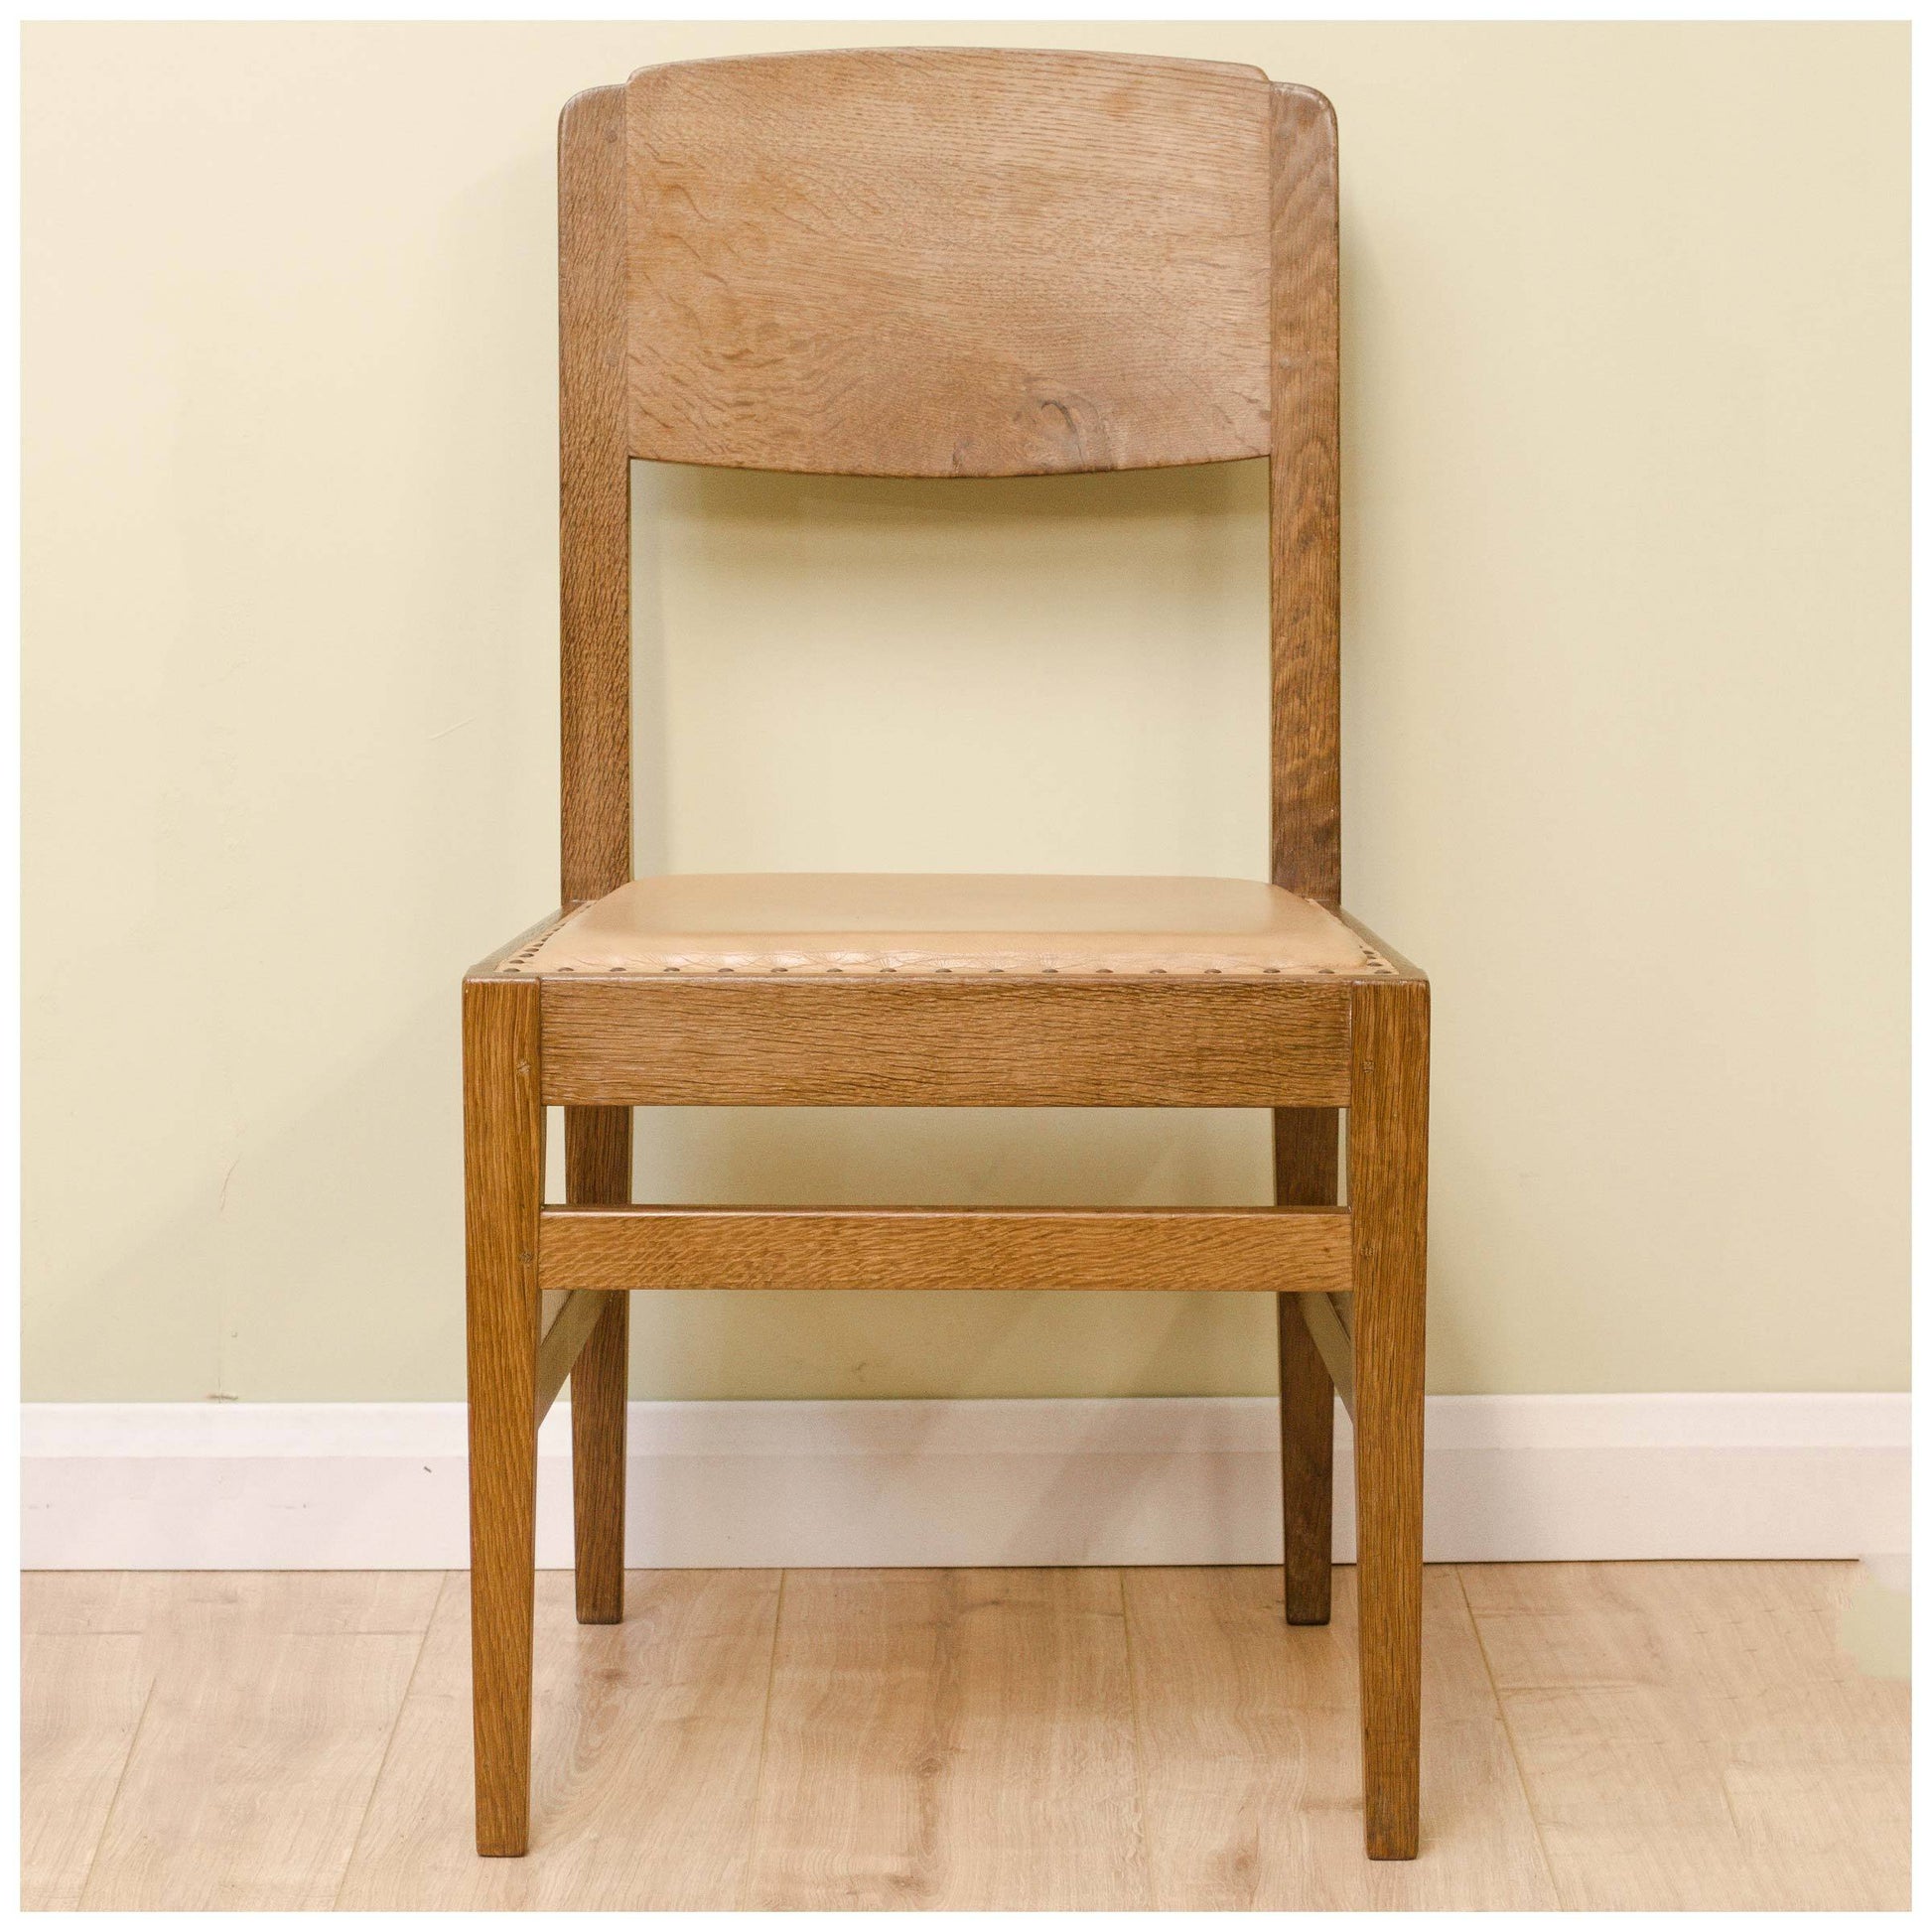 Robert 'Mouseman' Thompson Robert 'Mouseman' Thompson Yorkshire School Oak and Leather Chair